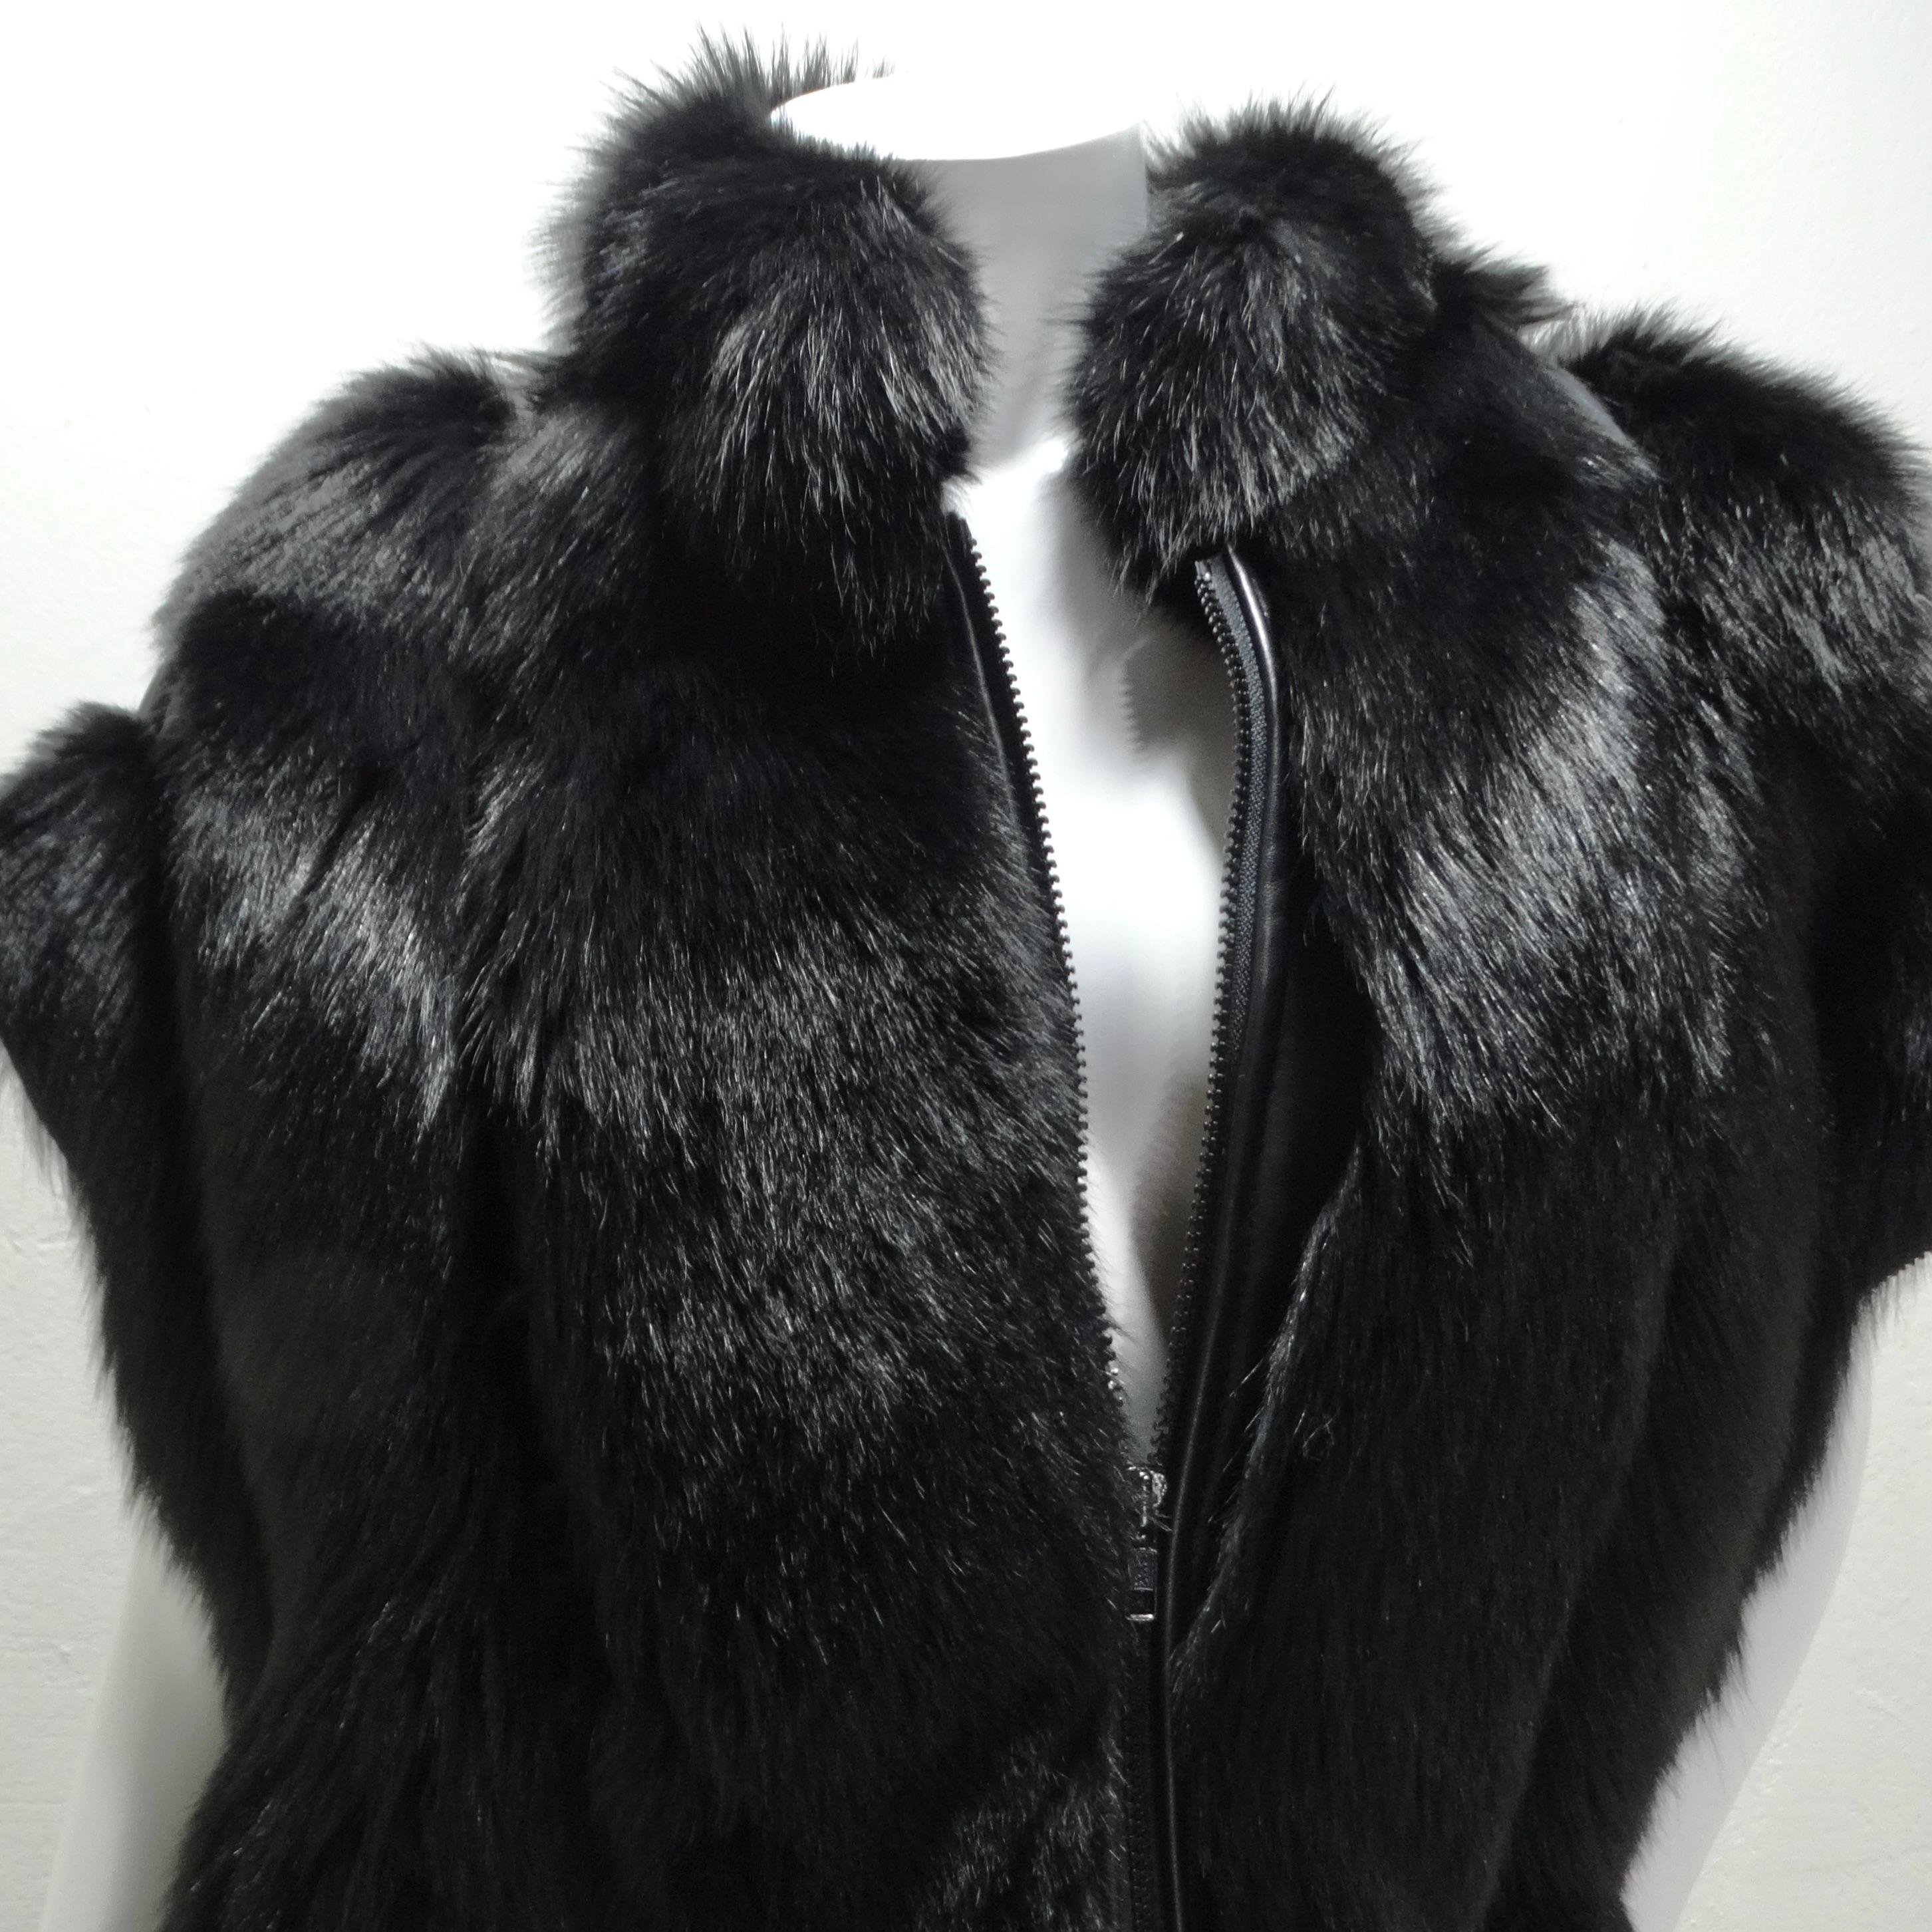 Introducing the epitome of 1980s glamour: the Ingrid Klahn Black Fur Leather Vest. This iconic piece exudes sophistication and edge, embodying the era's fashion-forward spirit. Crafted from sumptuous black fur, this vest boasts an oversized